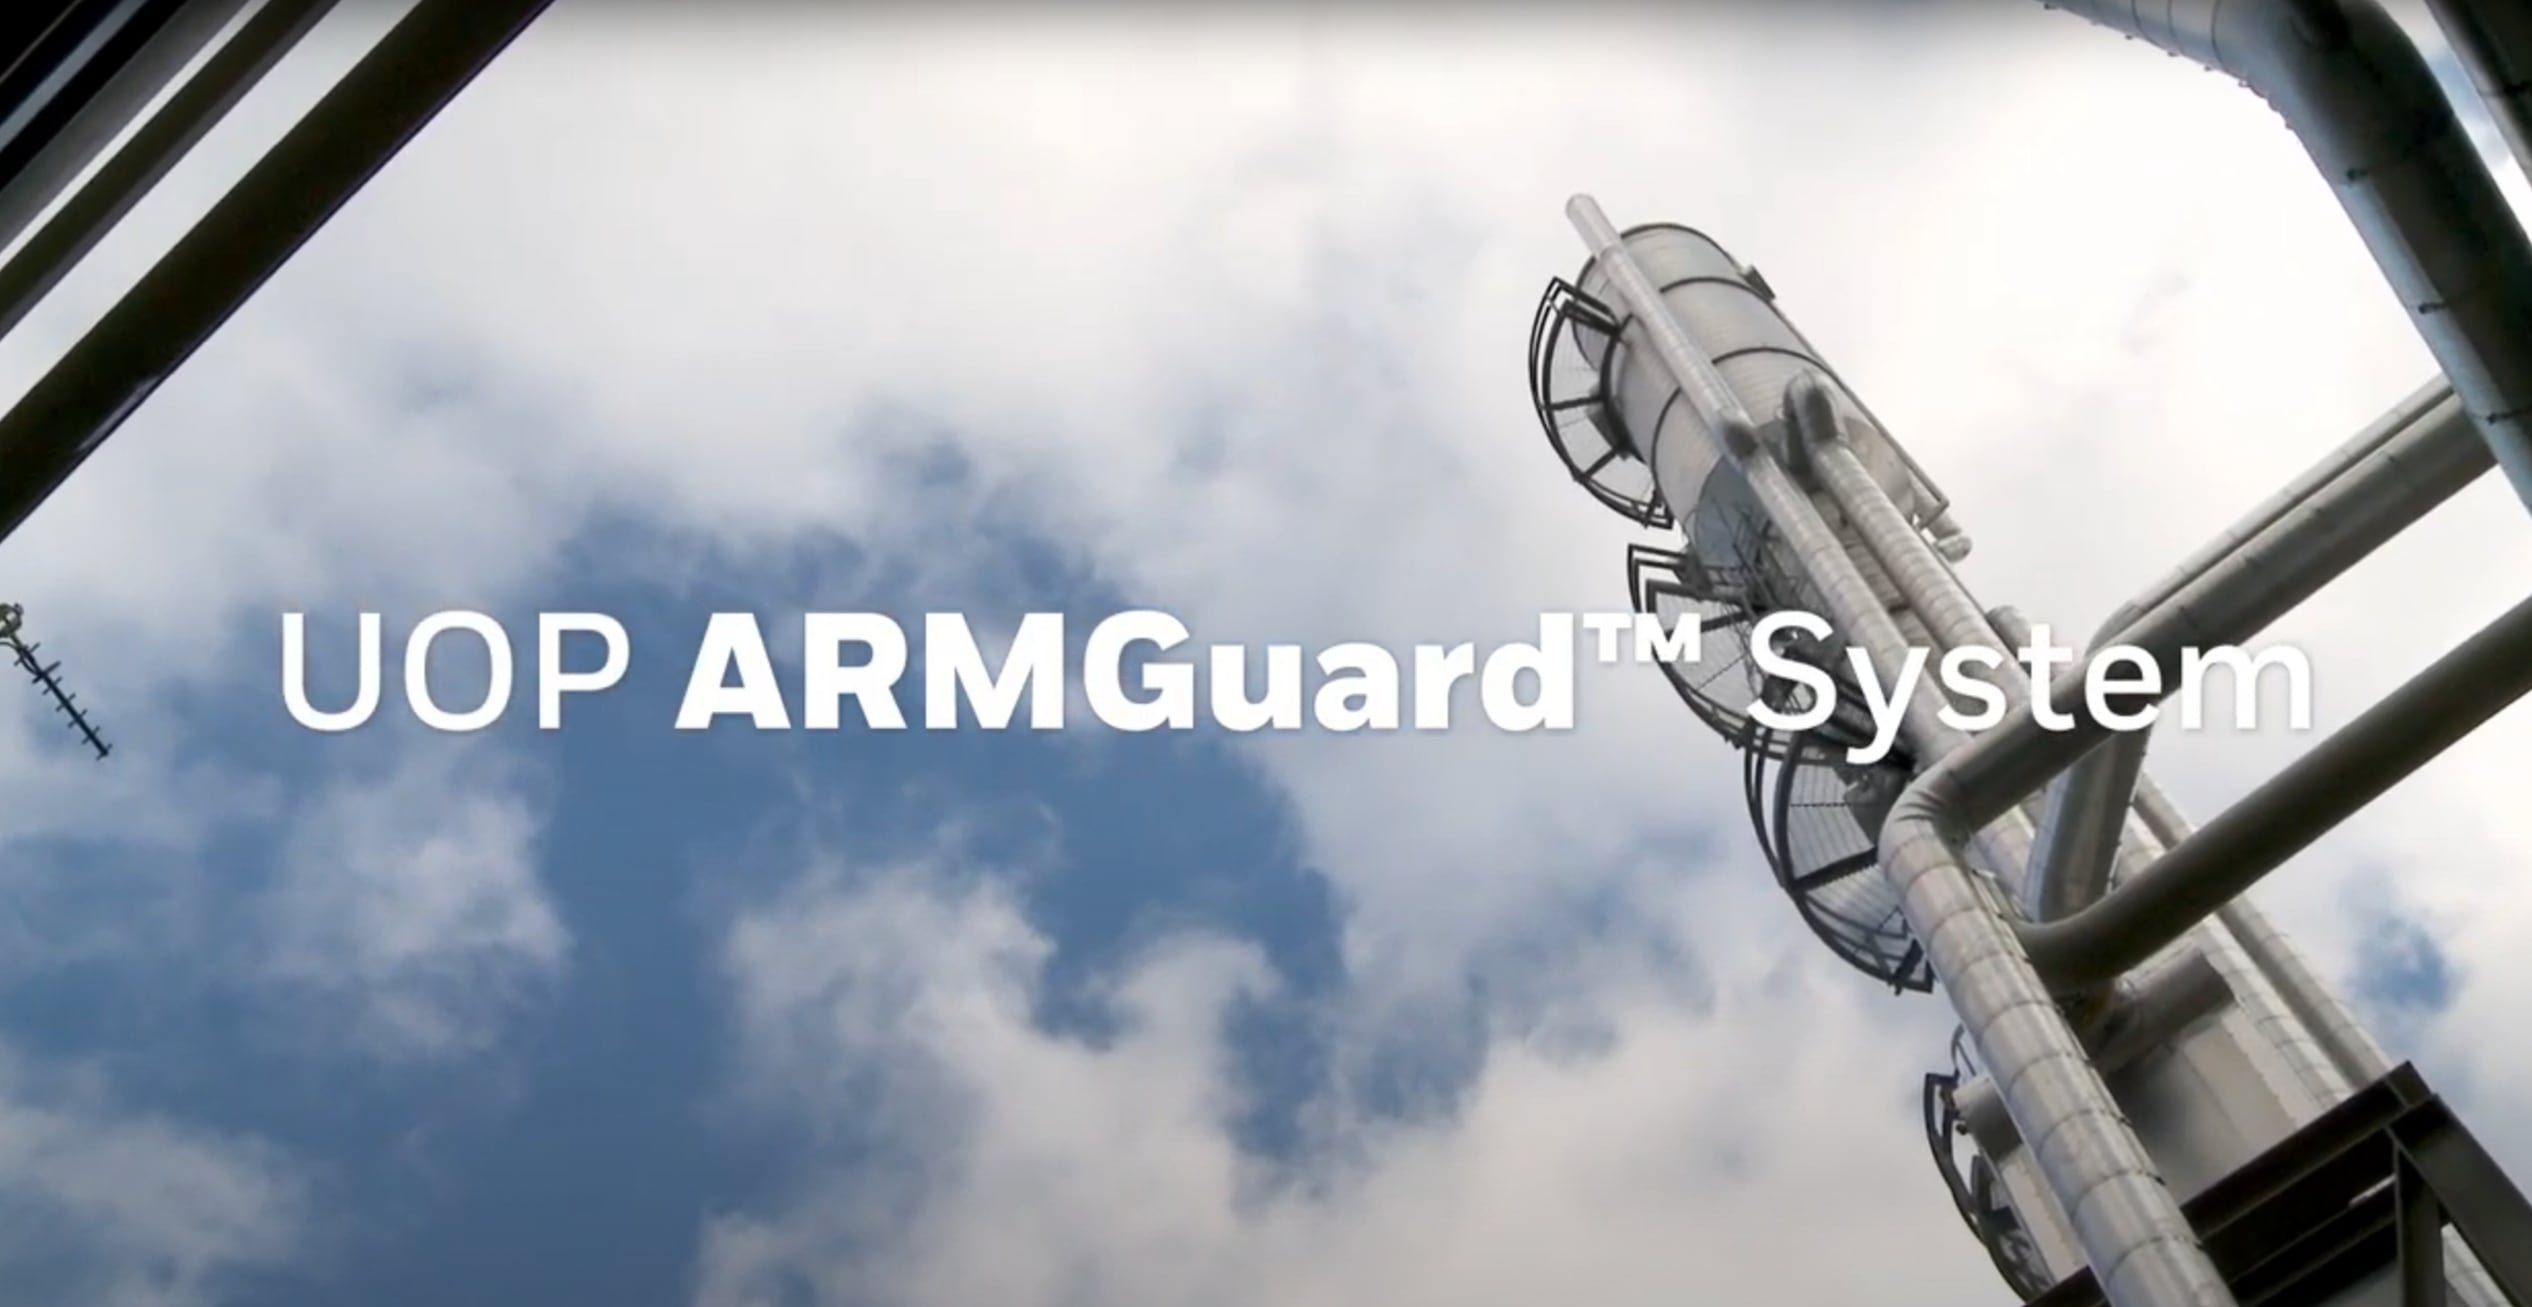 UOP ARMGuard System - Proactive Remote Monitoring